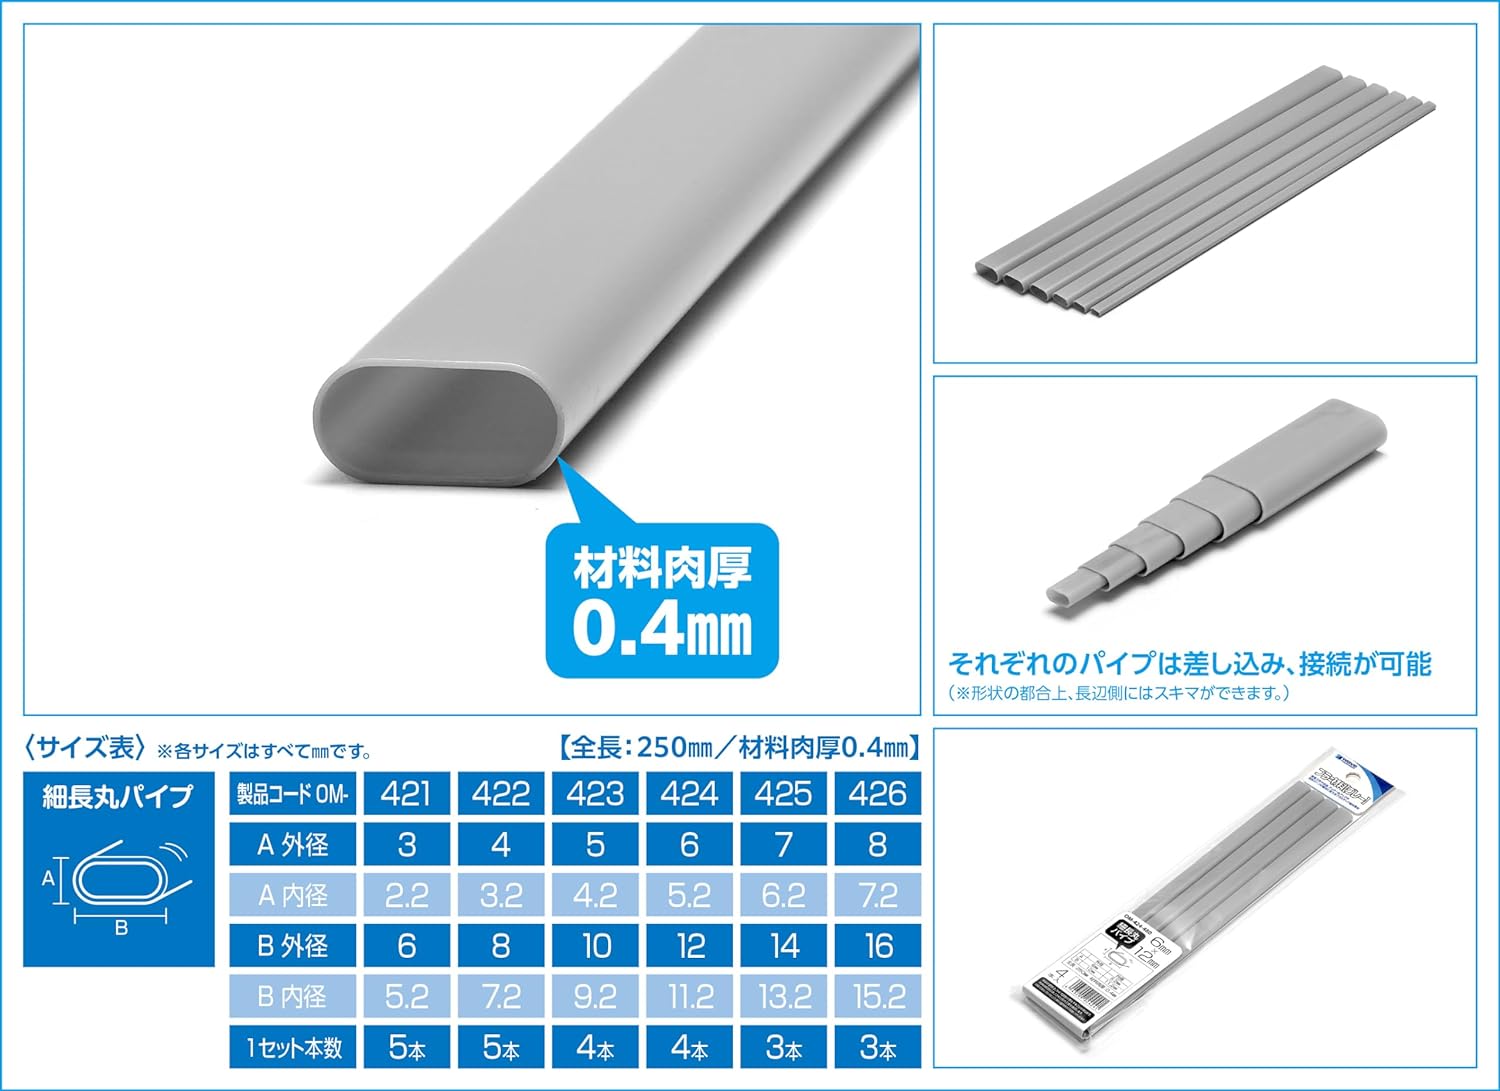 Wave OM-424 Plastic Material, Gray, Elongated Round Pipe, 0.2 x 0.5 inches (6 x 12 mm), 4 Pieces Material Series - BanzaiHobby